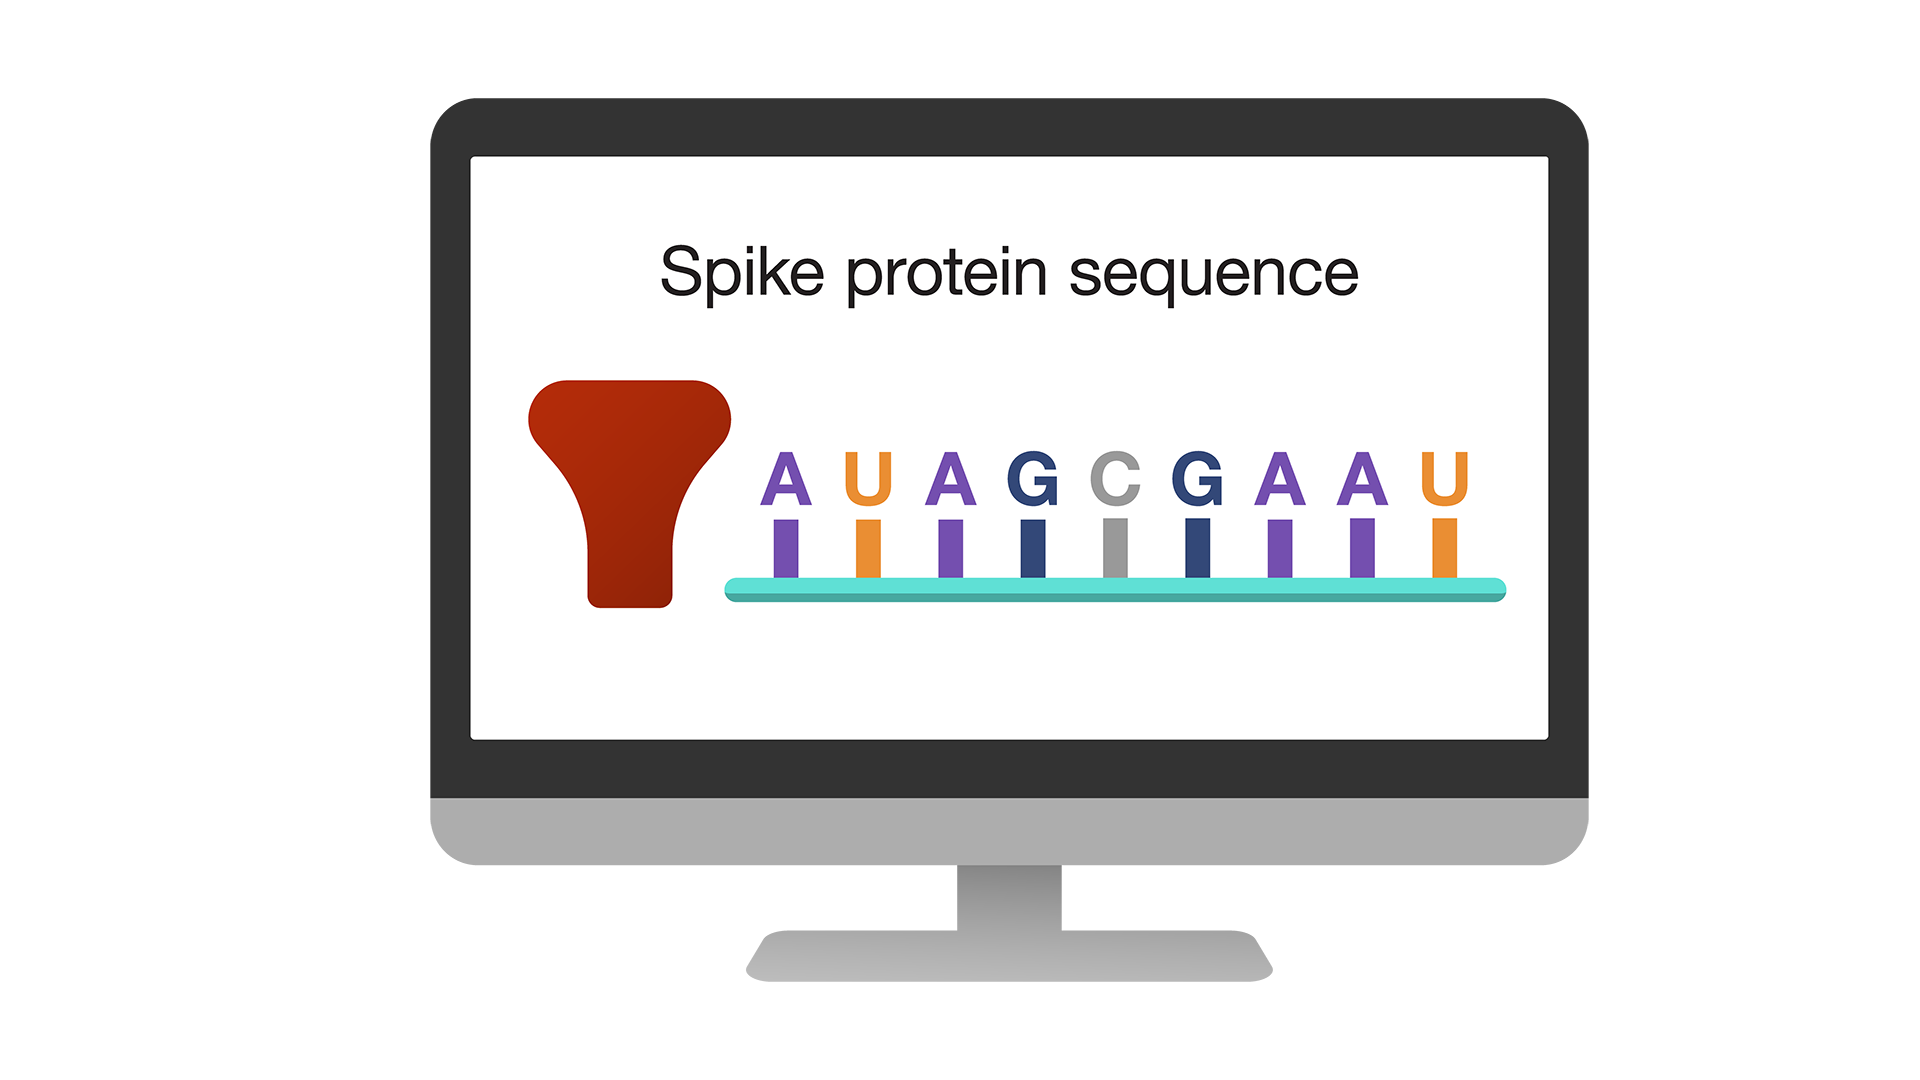 Spike protein sequence displayed on an iMac monitor